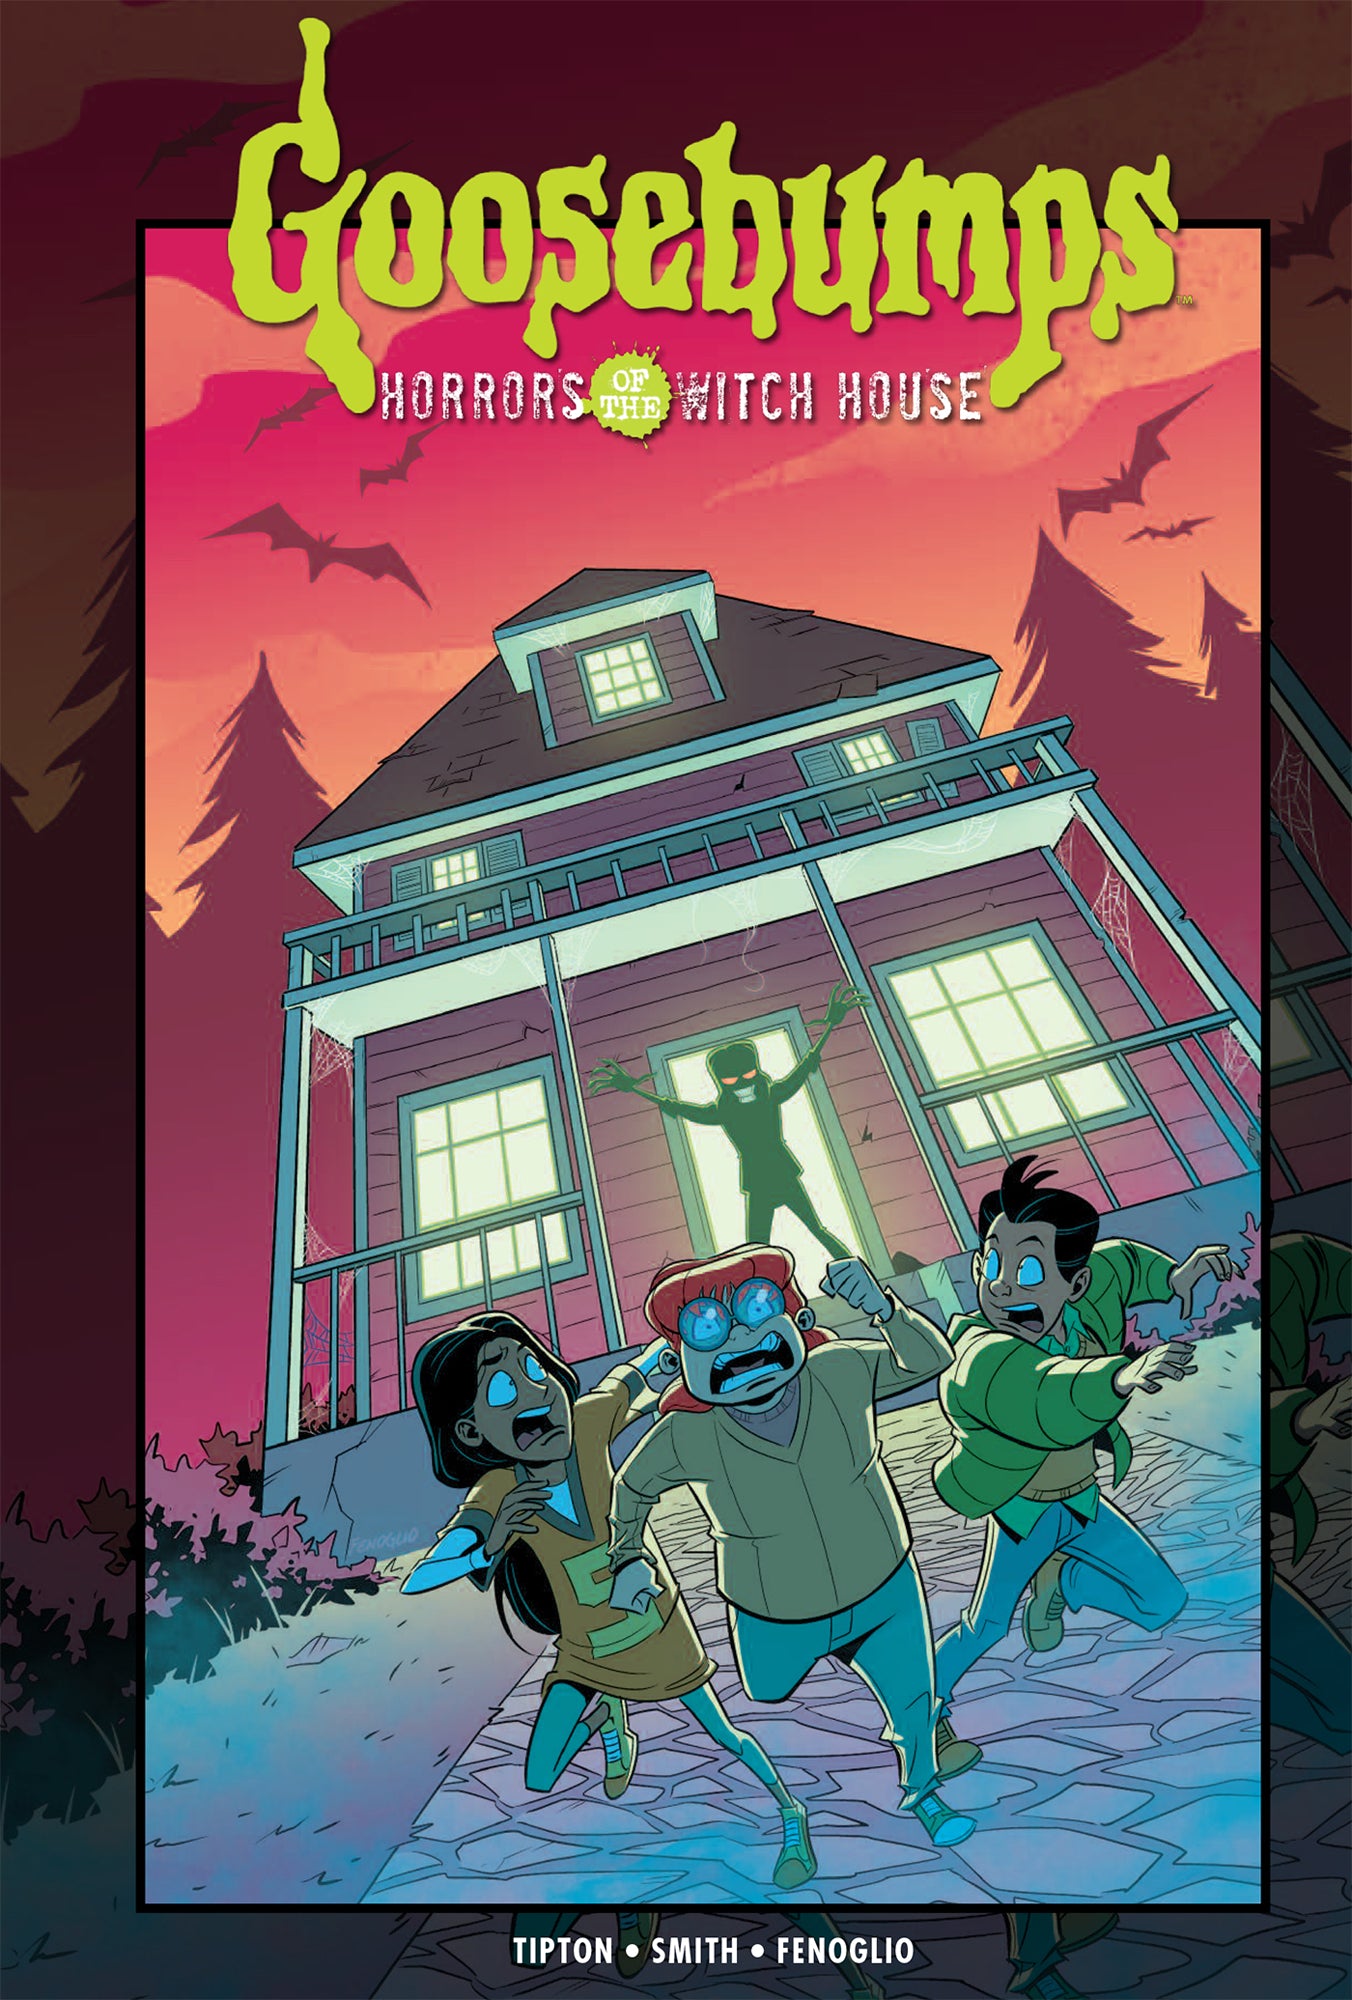 GOOSEBUMPS HORRORS OF THE WITCH HOUSE HC